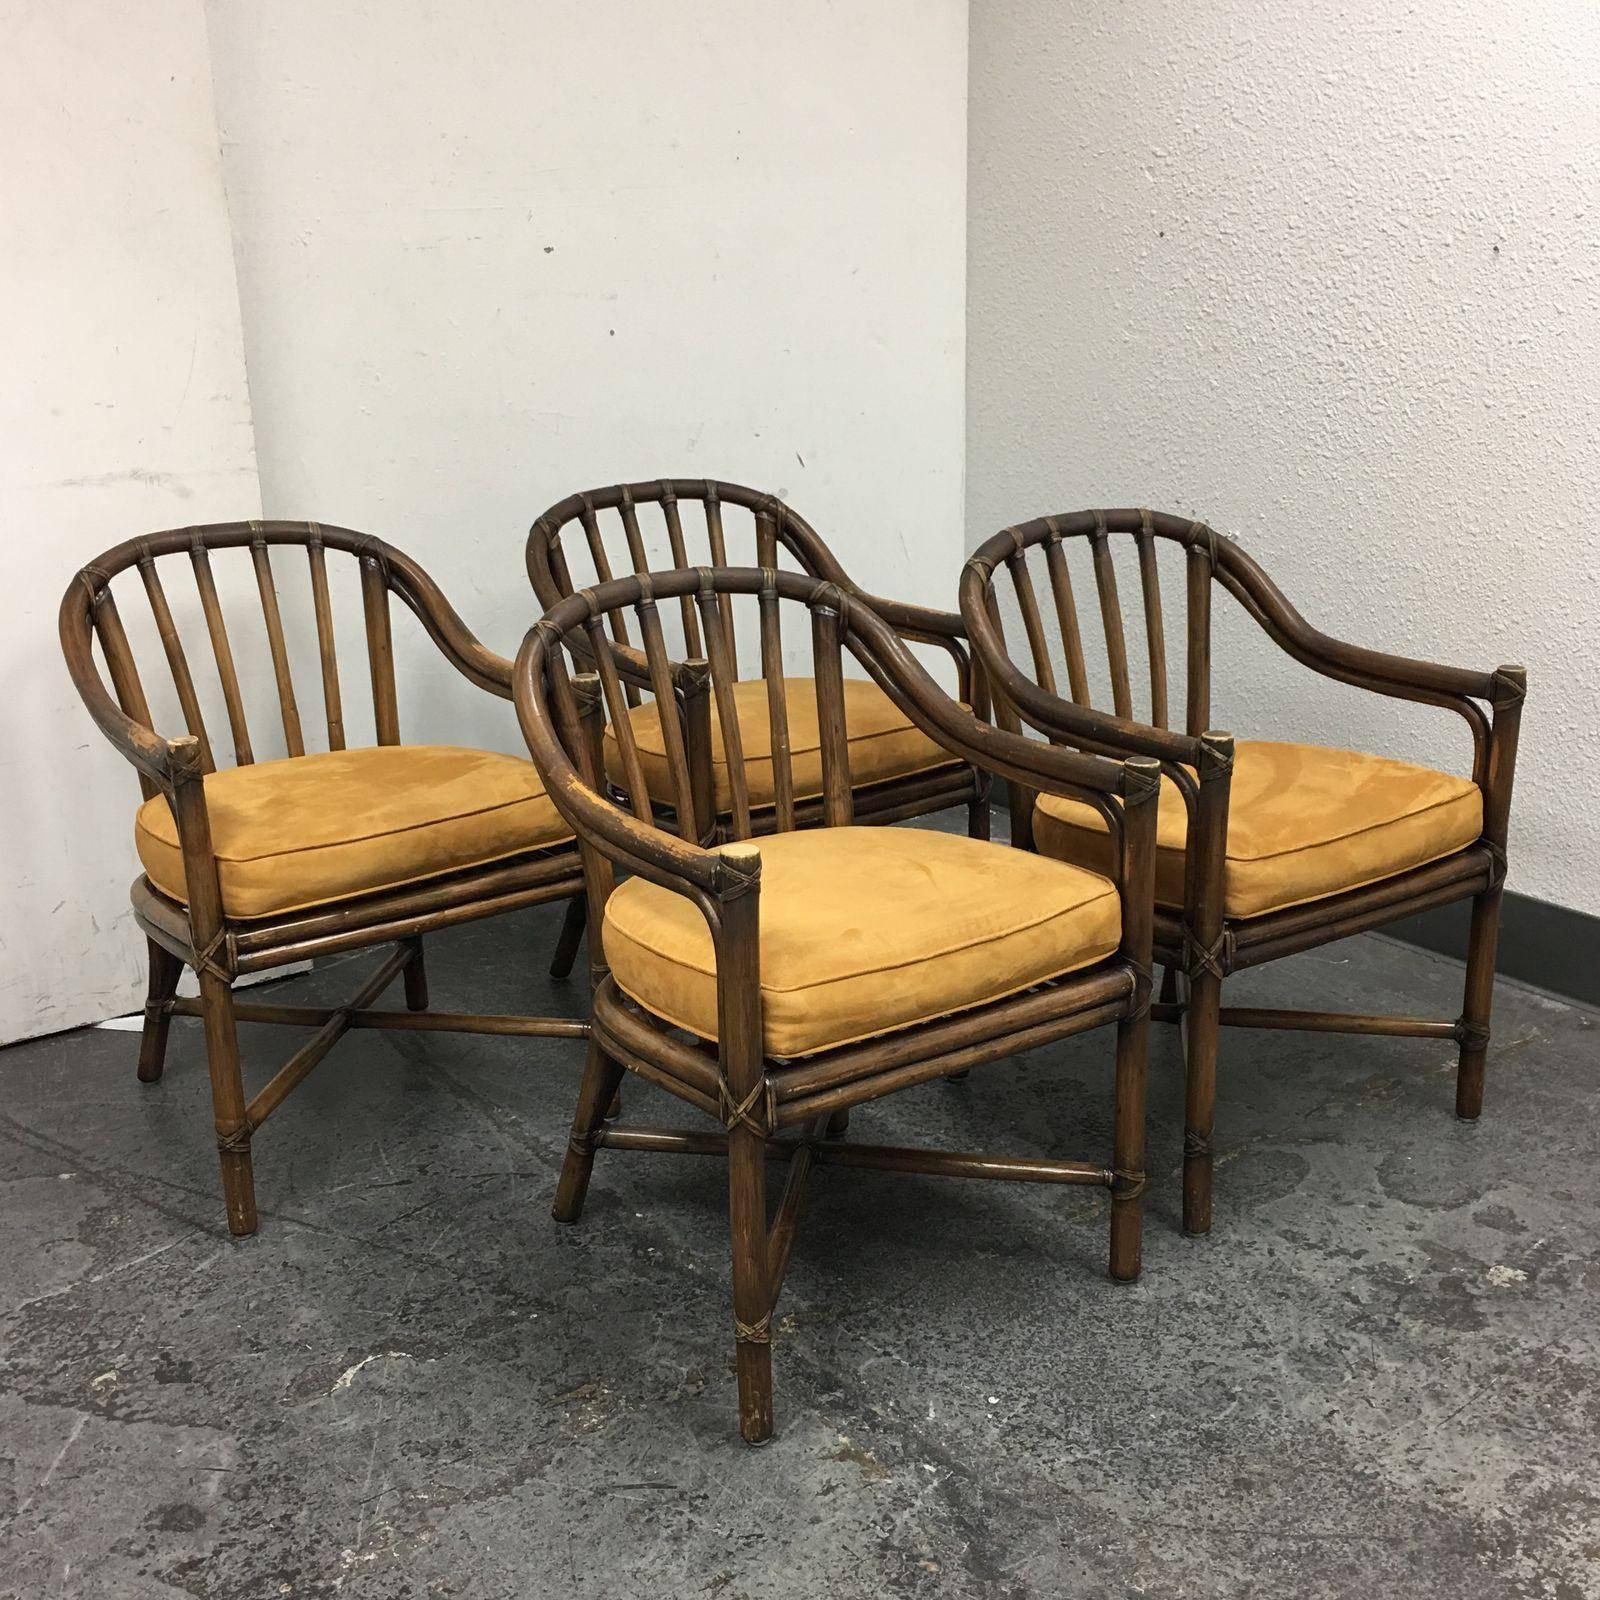 We have a set of four bamboo frame McGuire chairs. A Classic barrel back bamboo frame with a leather wrapped. The bamboo and leather shows distressed which add the characteristics to the beauty that McGuire can continue to withhold, no matter how